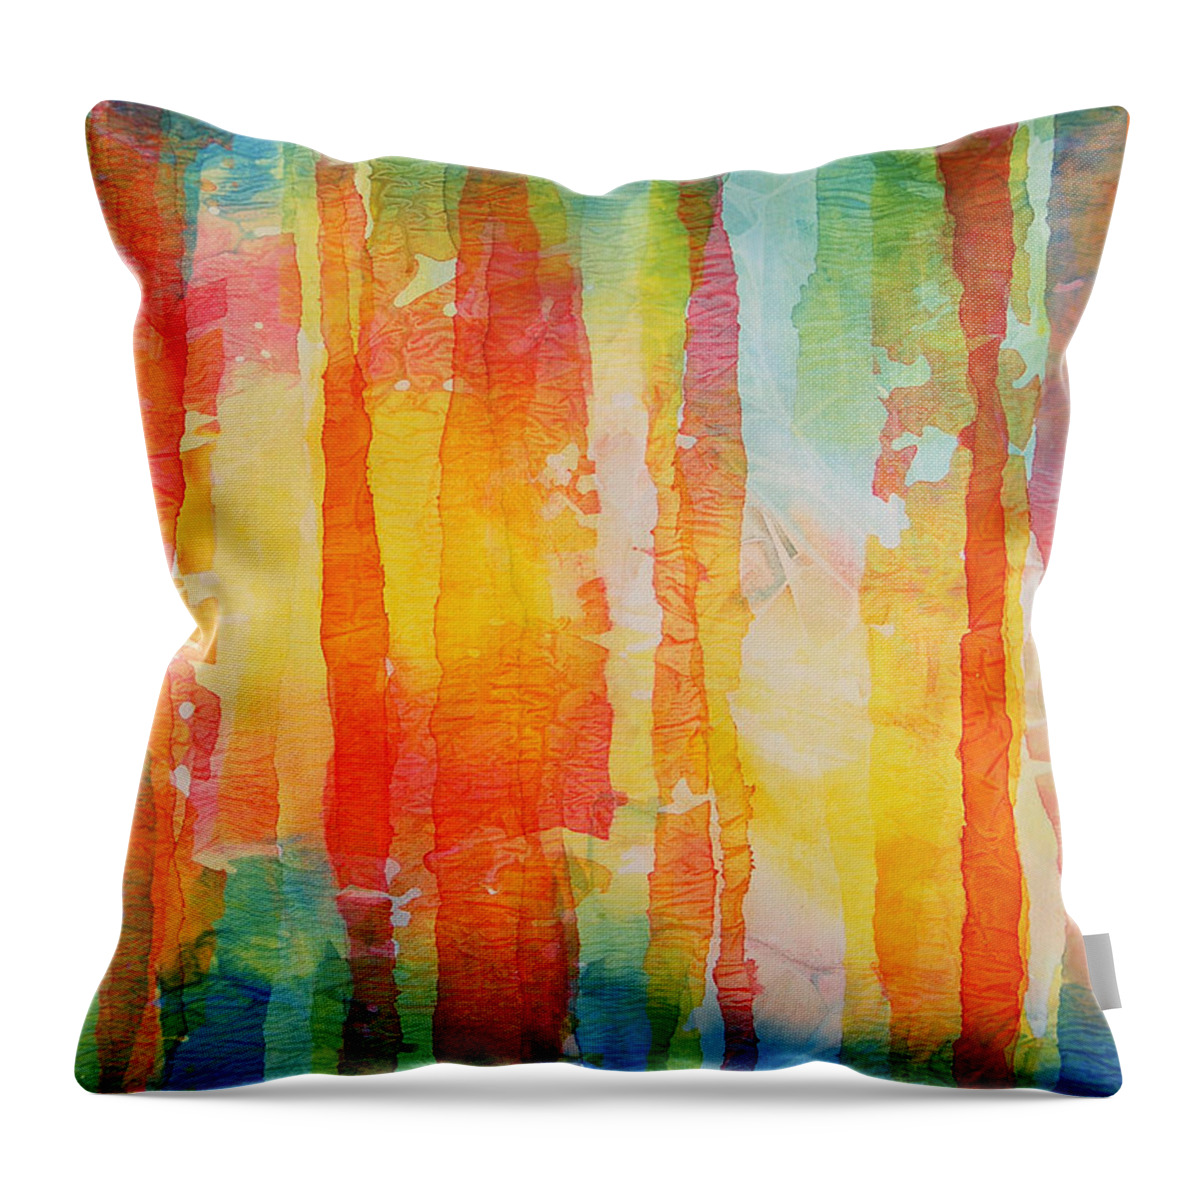 Abstract Throw Pillow featuring the painting Ethereal by Lynda Hoffman-Snodgrass